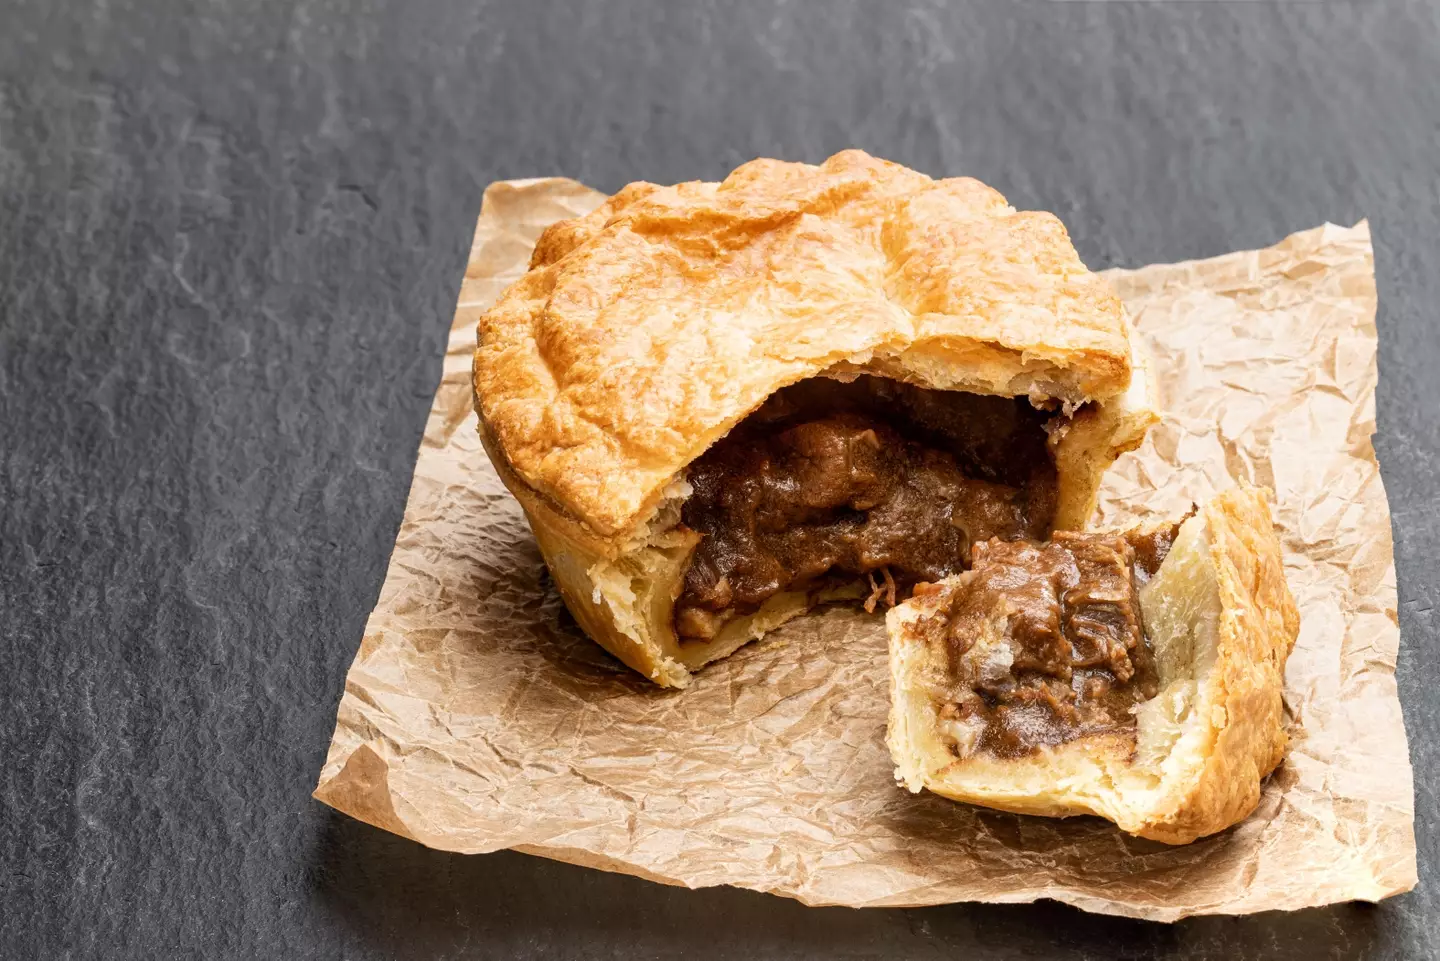 Online travel guide Taste Atlas has decided to put together a list that will absolutely baffle pie lovers.